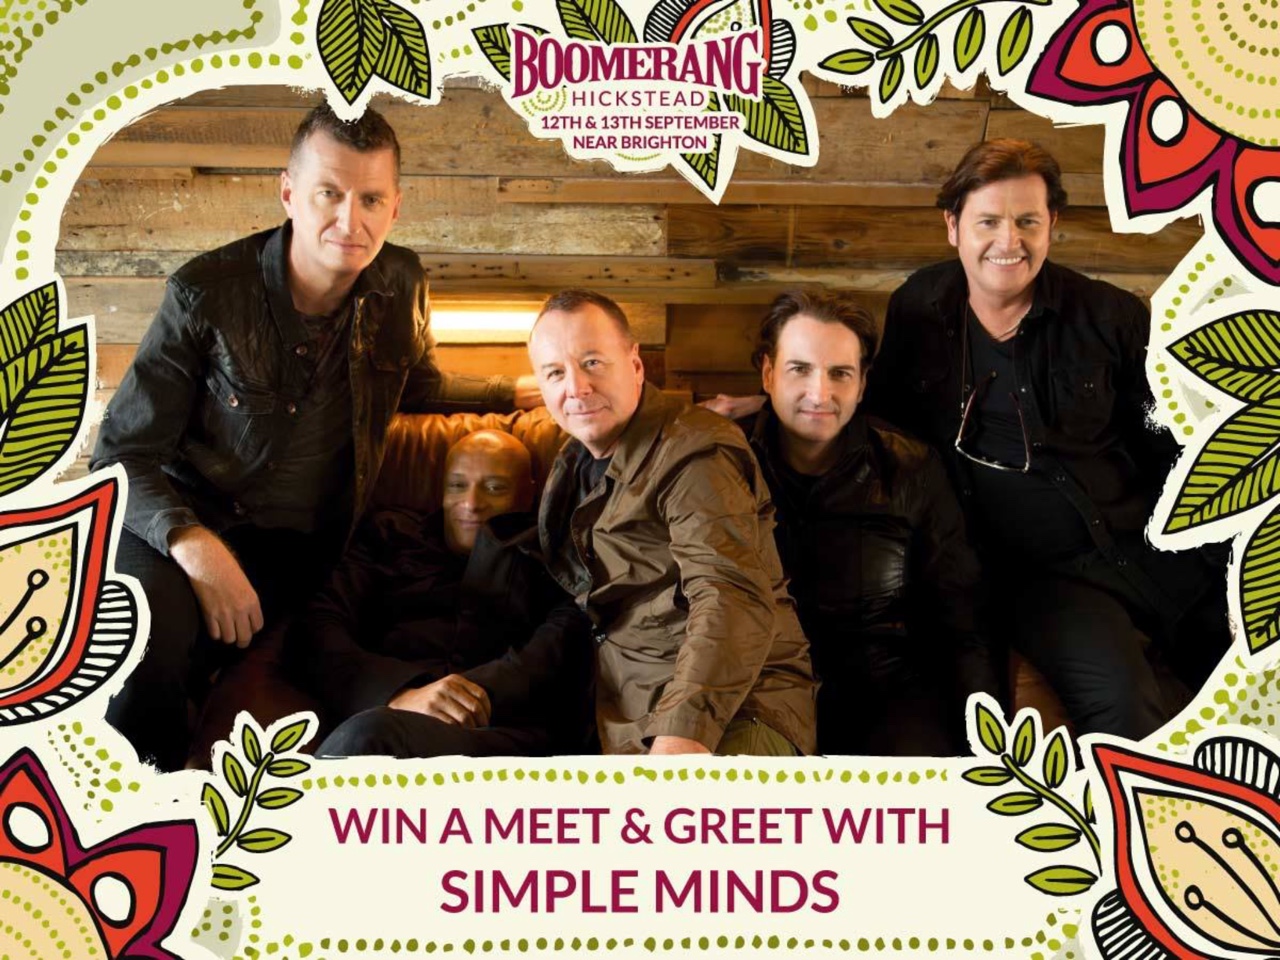 Win A Meet And Greet With Simple Minds At Boomerang!